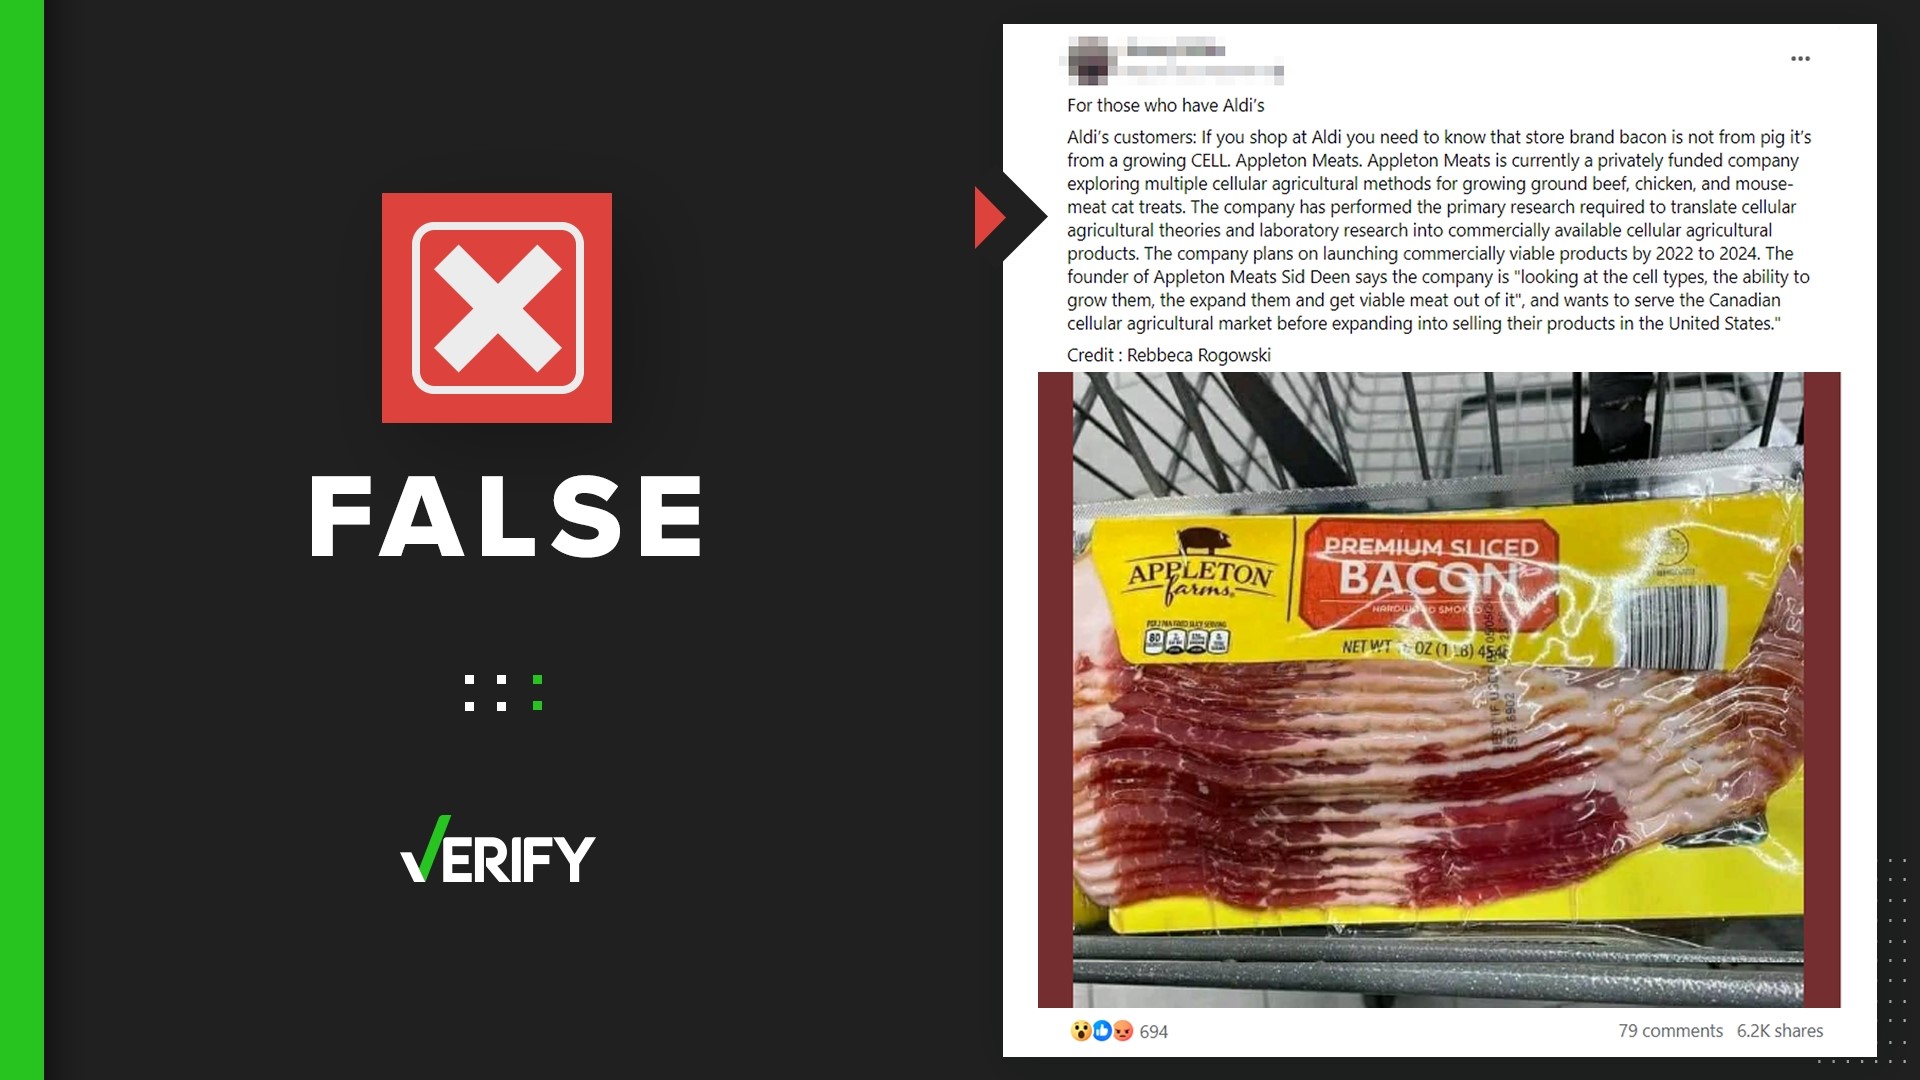 Aldi does not sell bacon grown from cells in a lab. The grocery chain sells bacon and other deli meats under the Appleton Farms brand, not Appleton Meats.